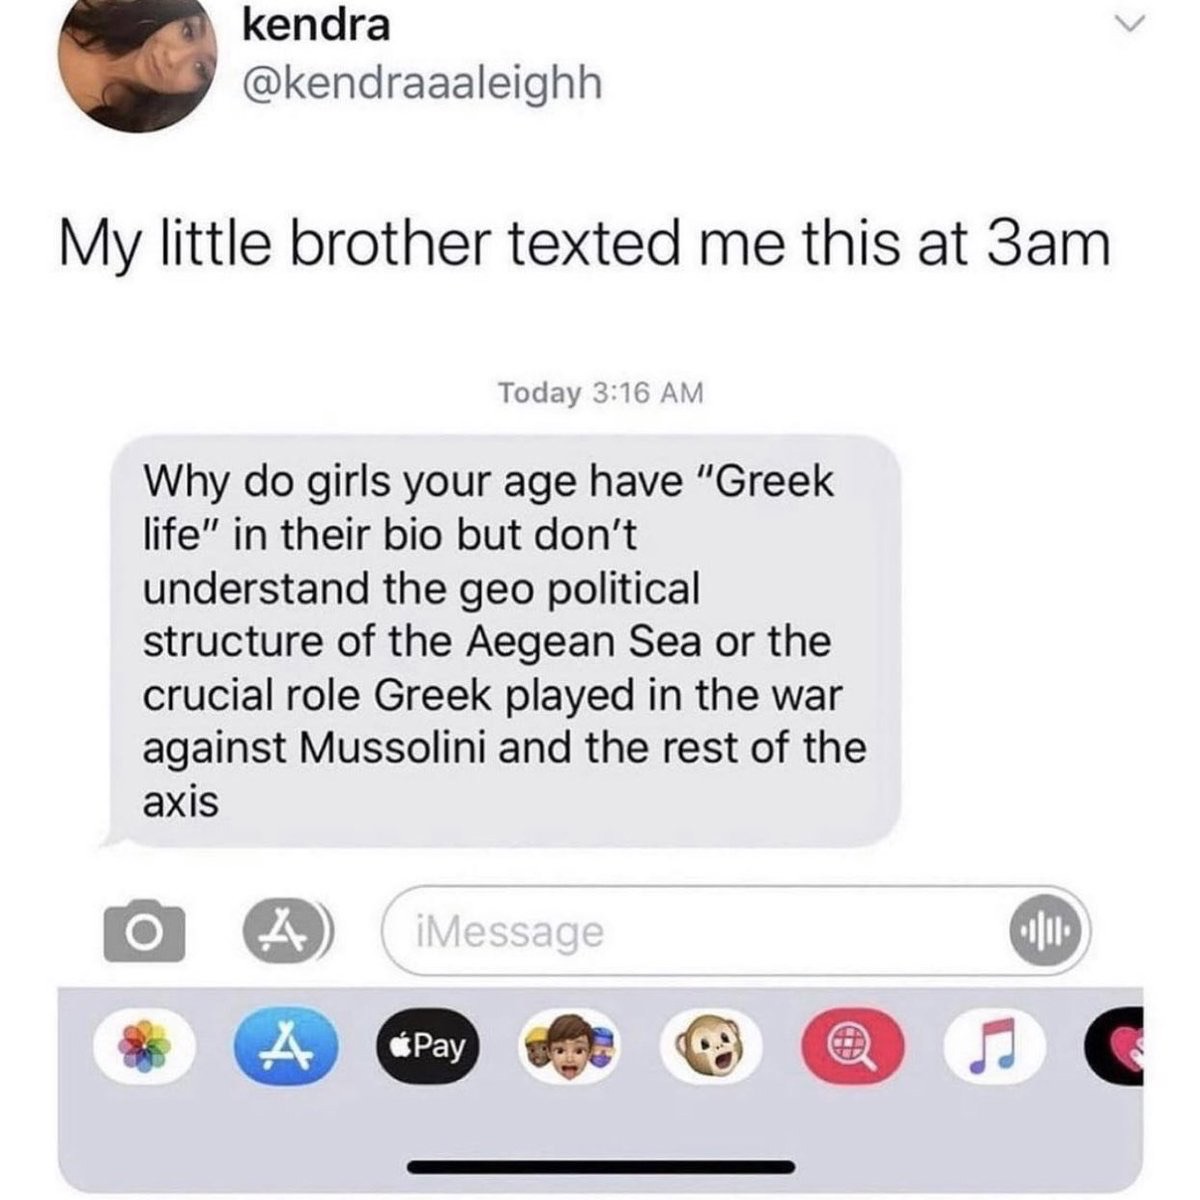 dudes post wins - txt yeonjun imagines - kendra My little brother texted me this at 3am Today Why do girls your age have "Greek life" in their bio but don't understand the geo political structure of the Aegean Sea or the crucial role Greek played in the w